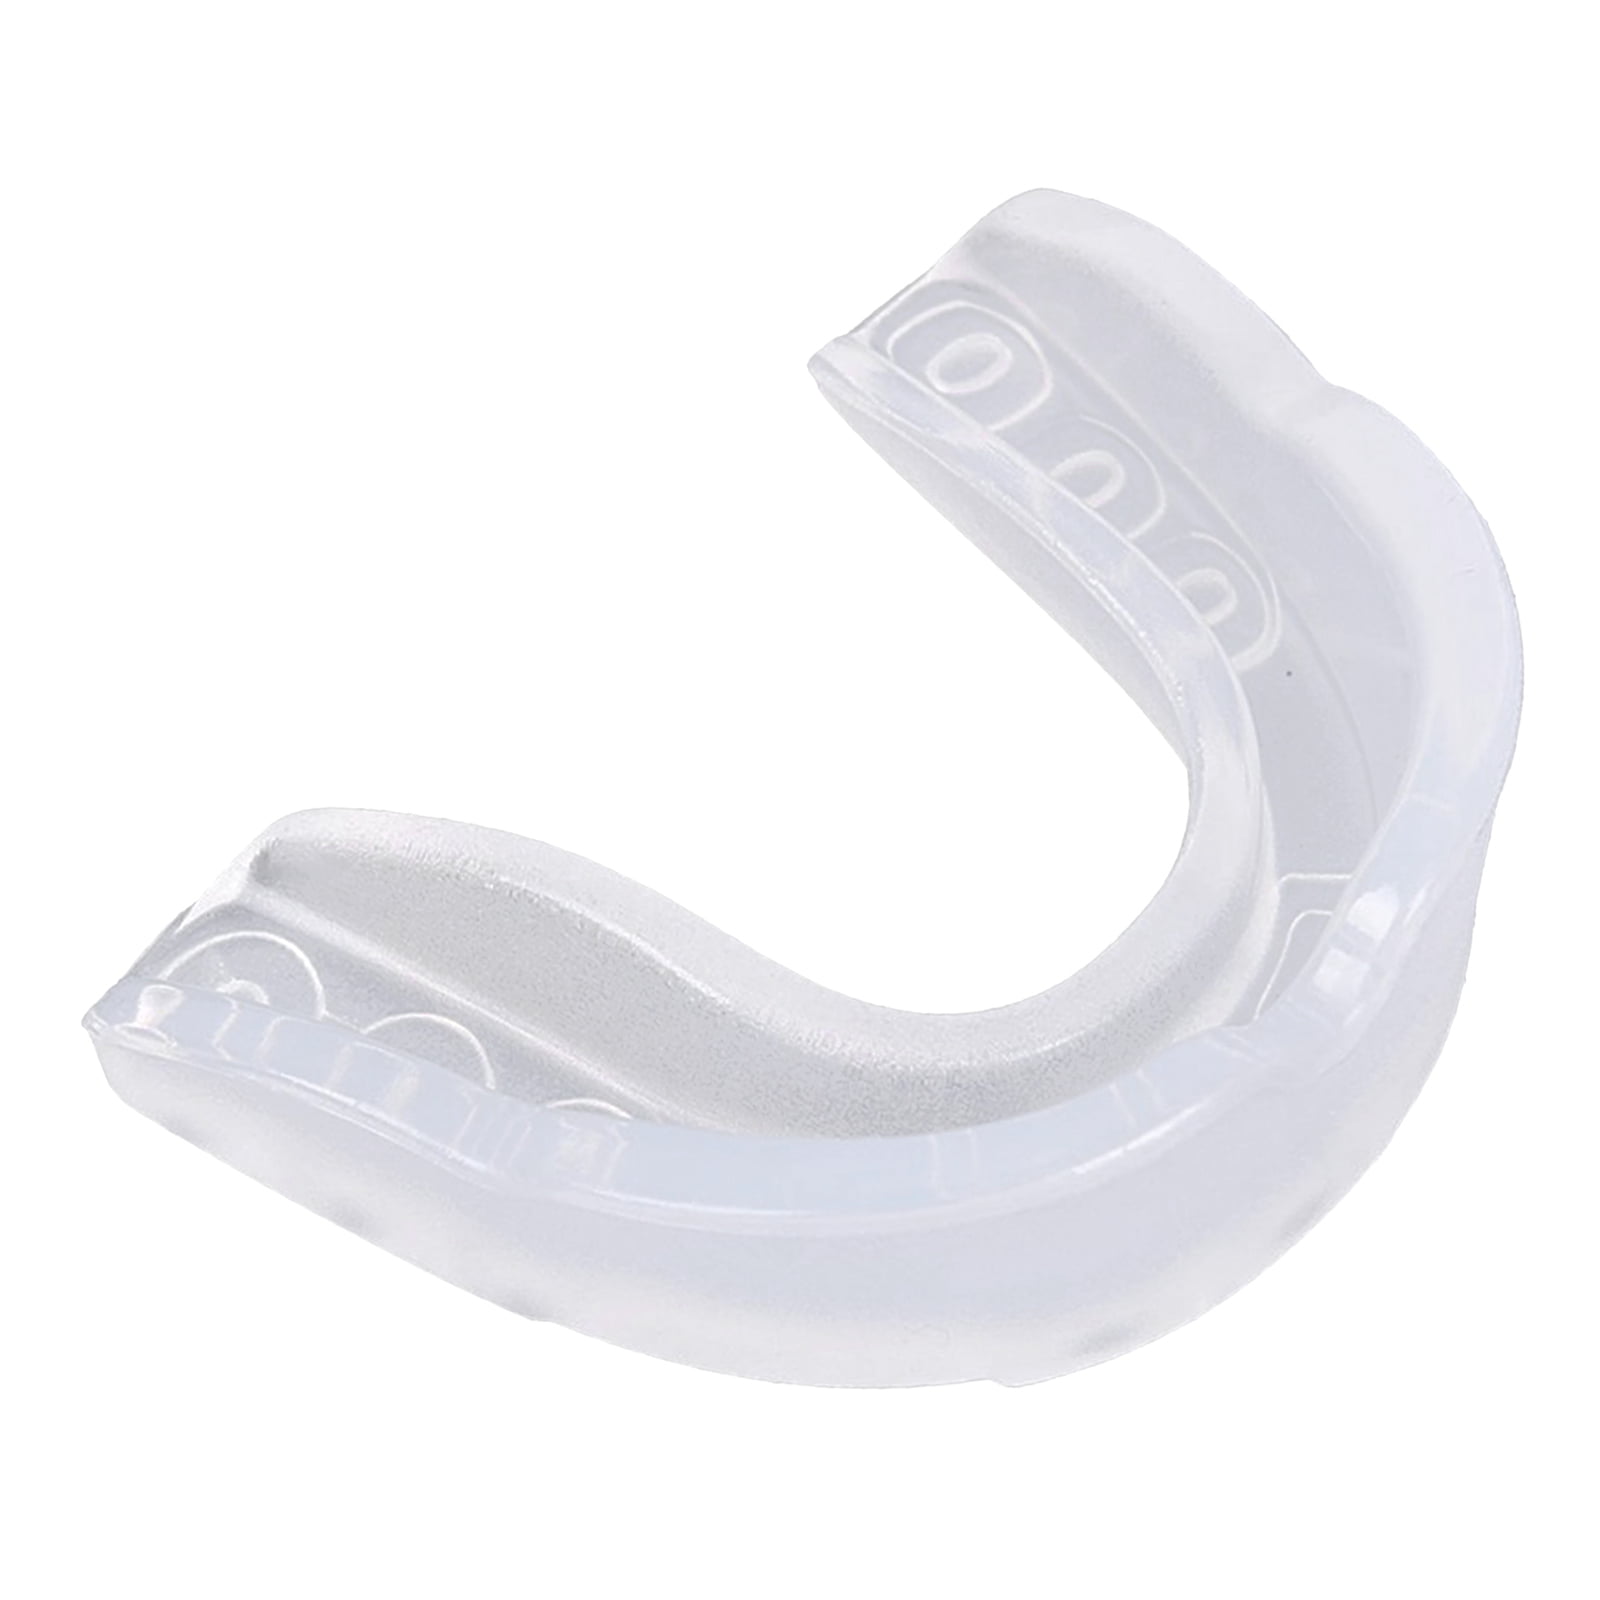 Boxing Mouth Guard MMA Martial Arts Gum Shield Rugby Teeth Protection Sports New 